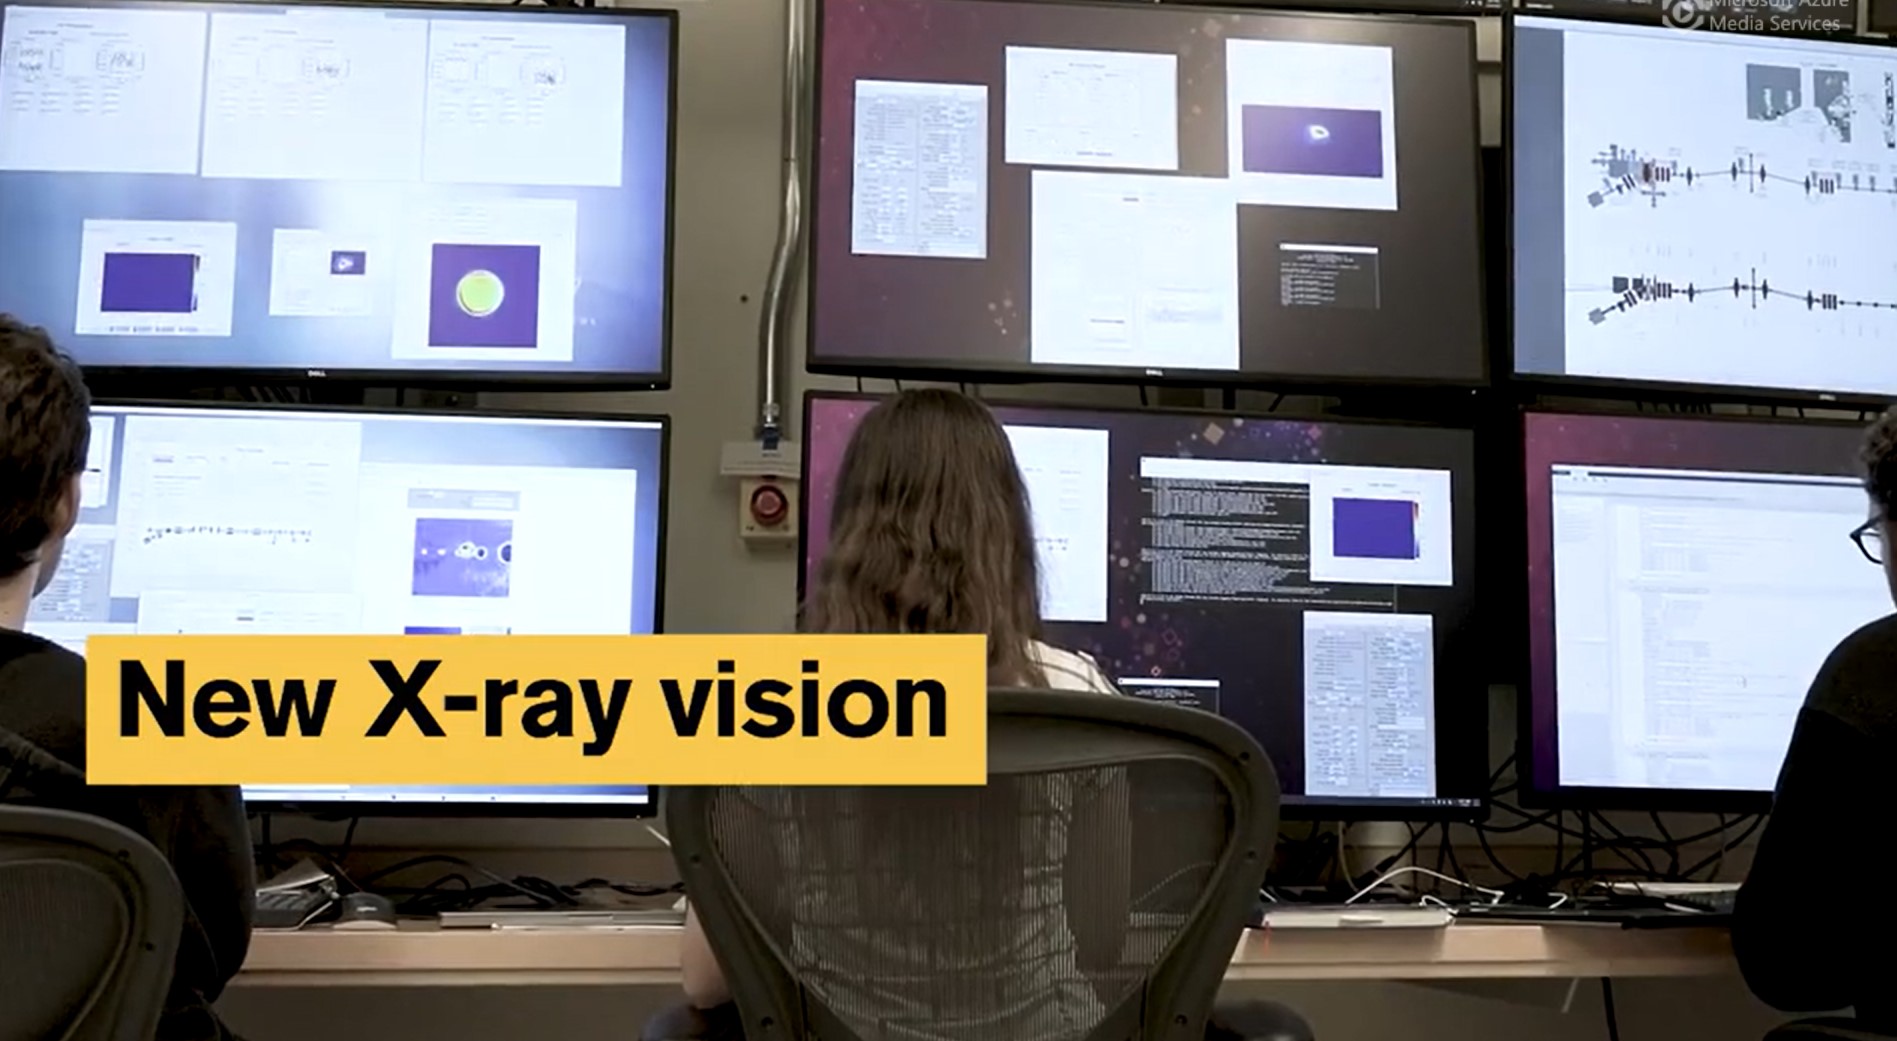 A new x-ray vision